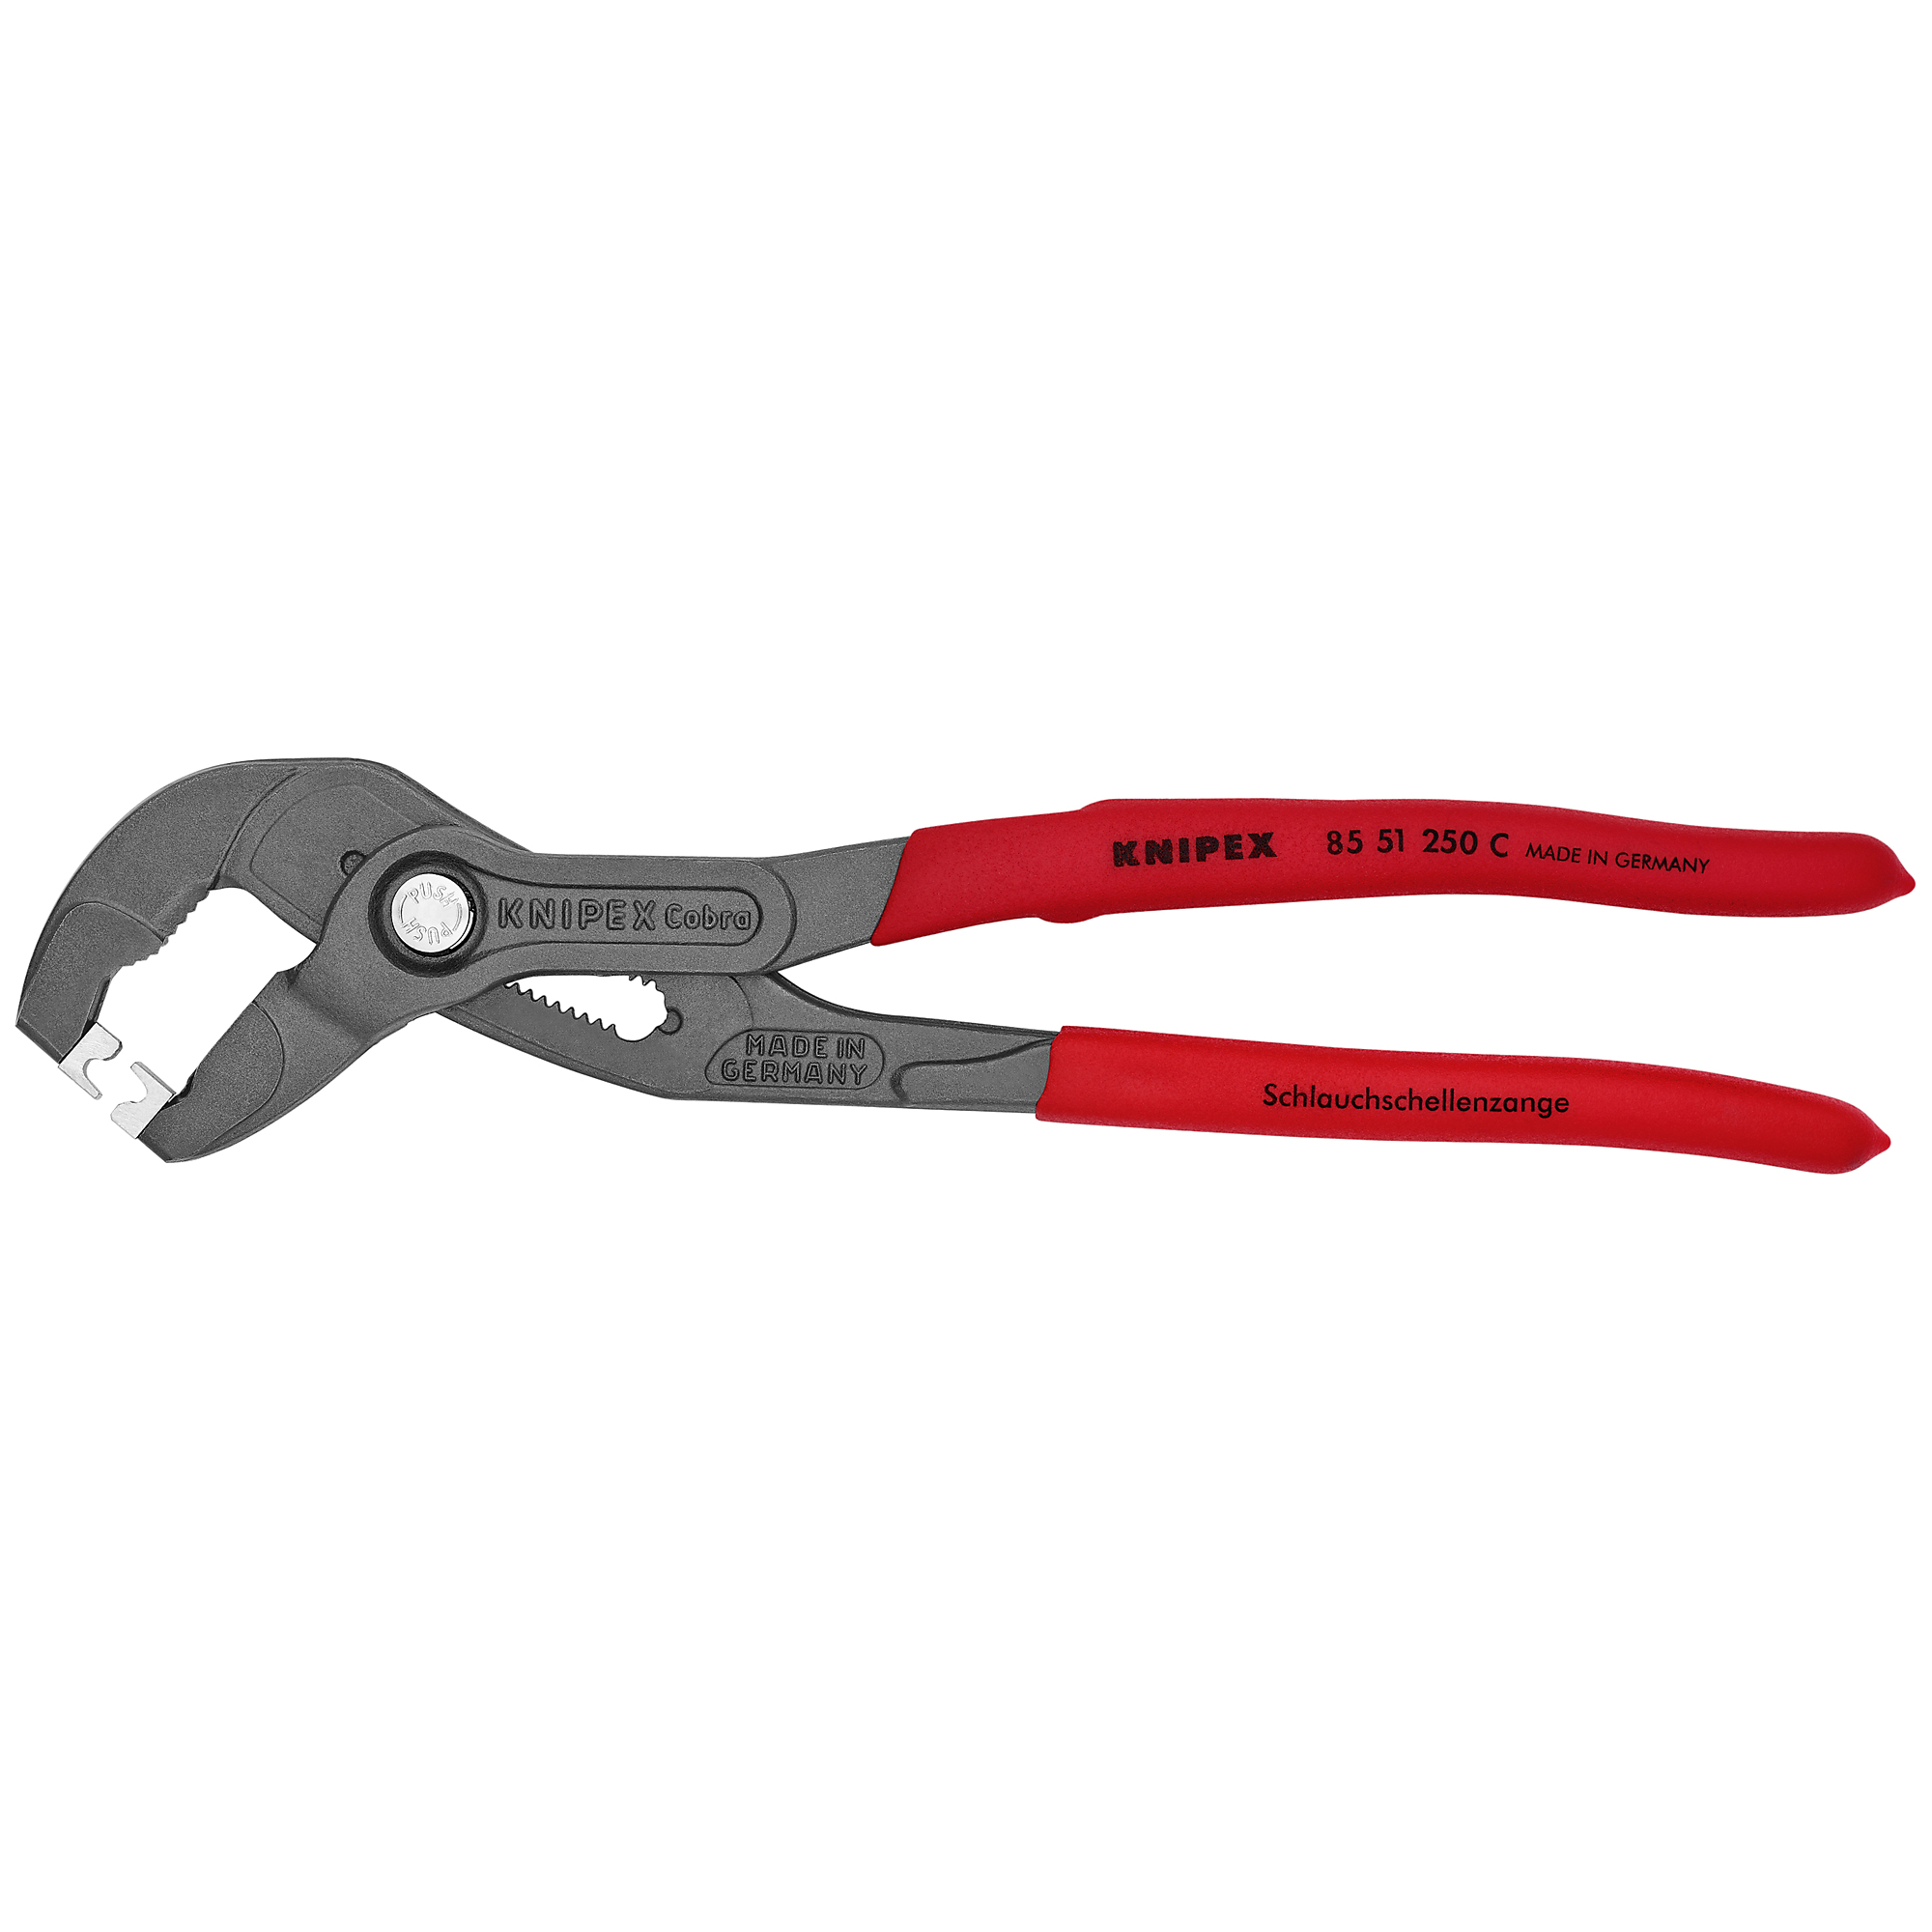 KNIPEX, Hose Clamp Pliers for Click Clamps, Bulk, 10Inch, Pieces (qty.) 1 Material Steel, Jaw Capacity 2.75 in, Model 85 51 250 C